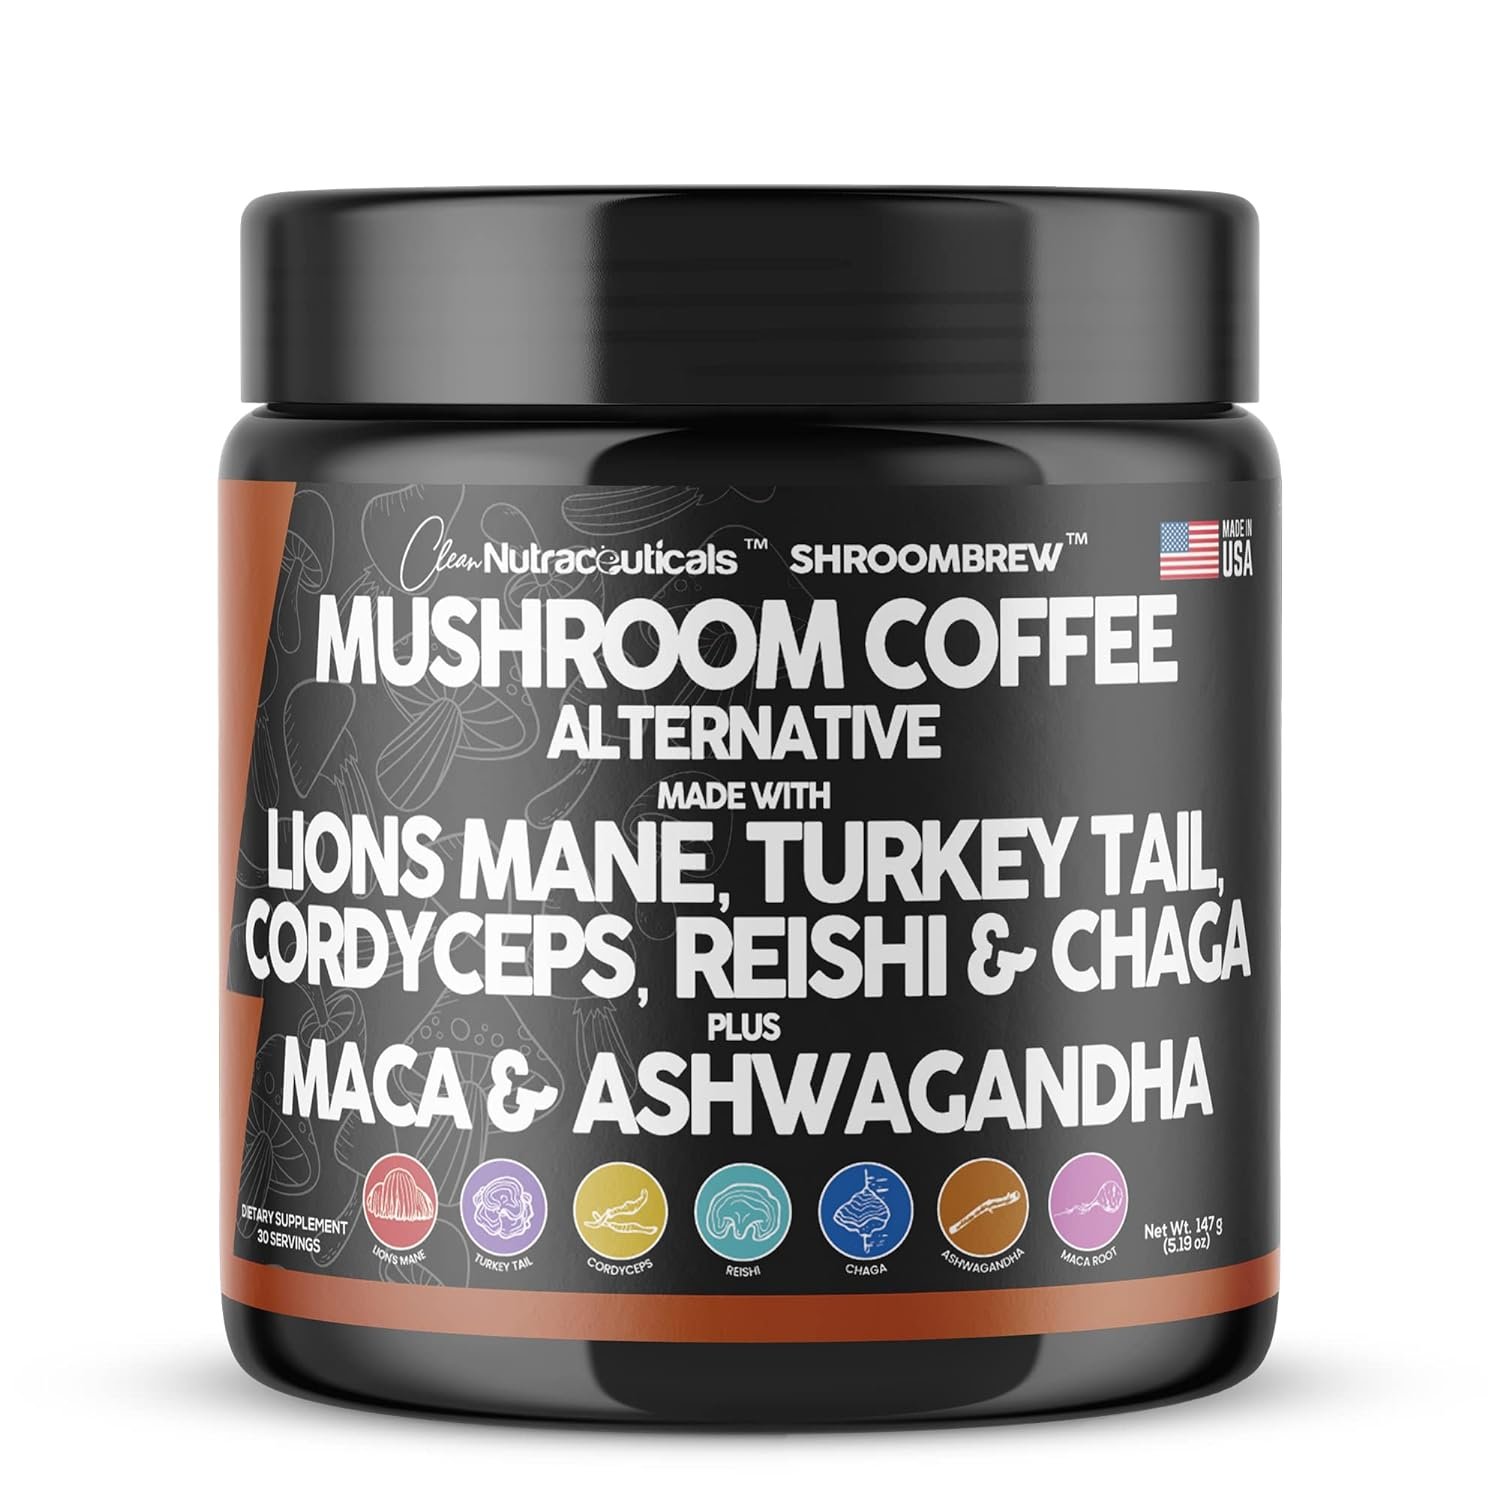 Clean Nutraceuticals Mushroom Coffee Alternative Mix Review